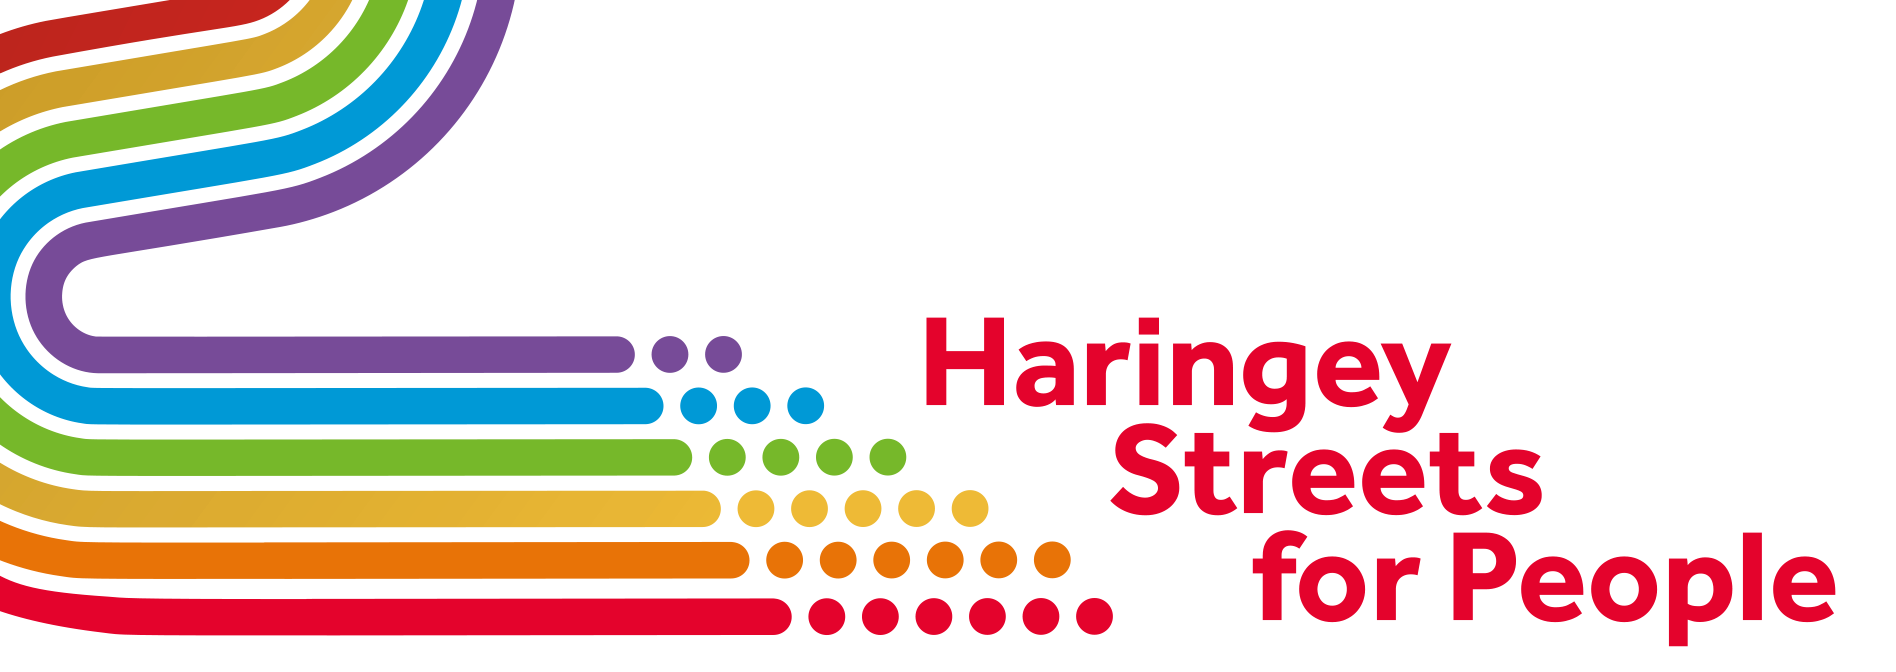 Haringey Streets for People